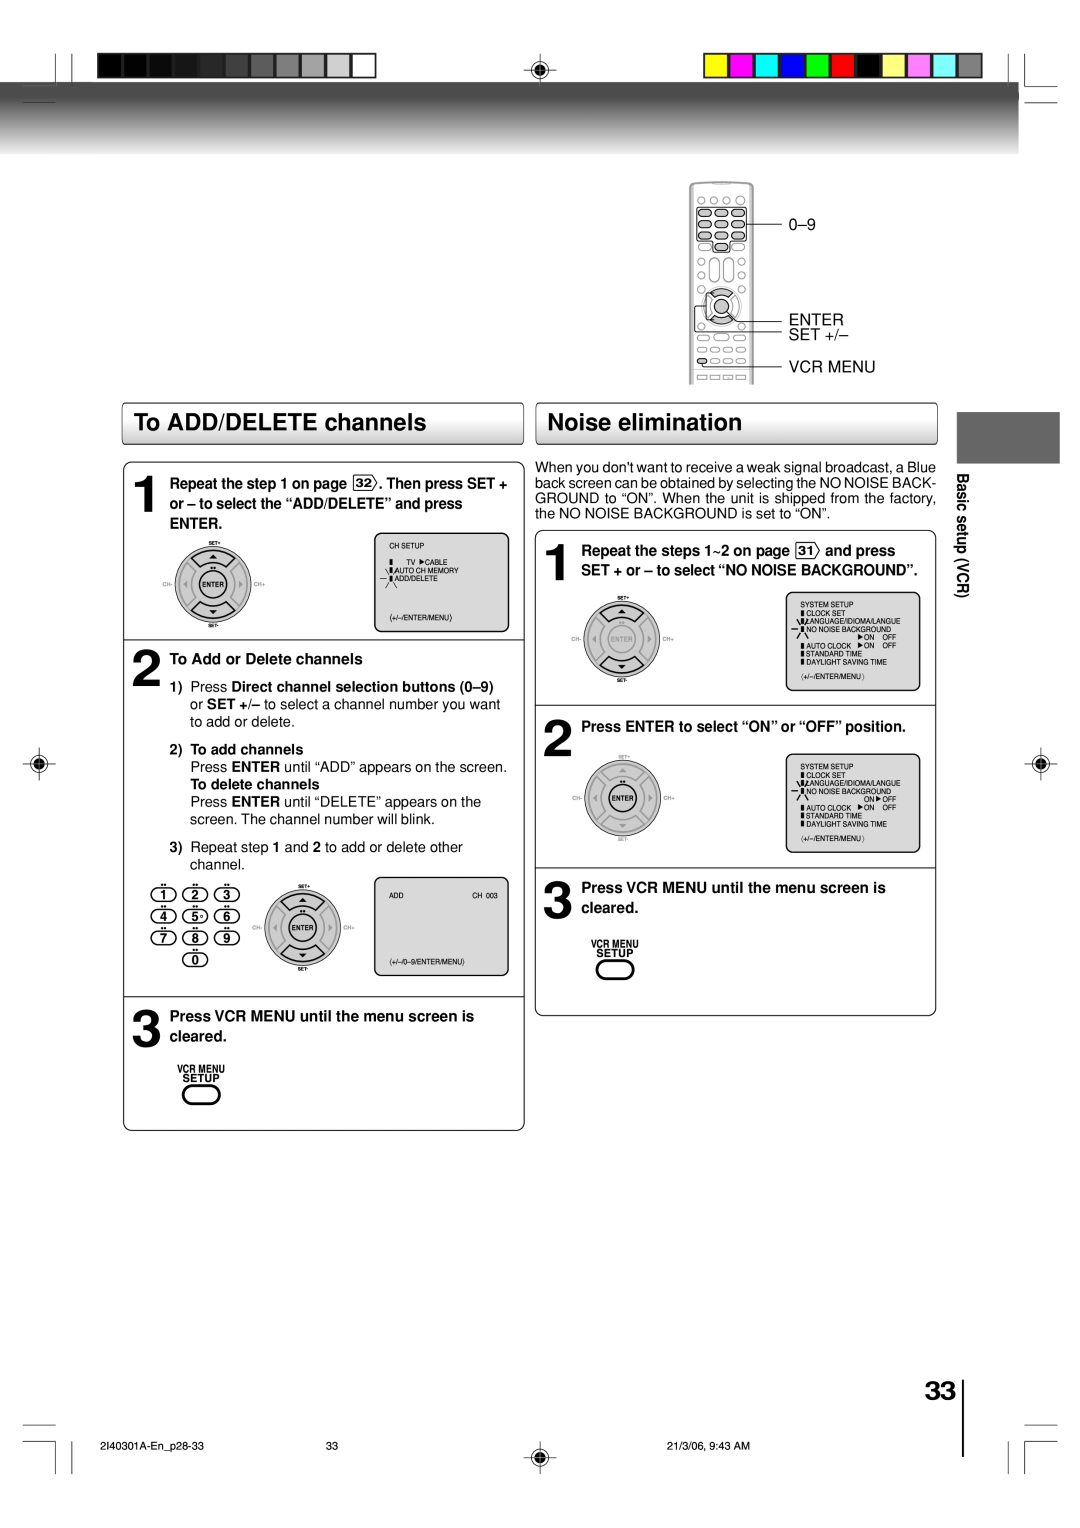 Toshiba SD-V594SC owner manual To ADD/DELETE channels, Noise elimination, Enter, To Add or Delete channels, To add channels 